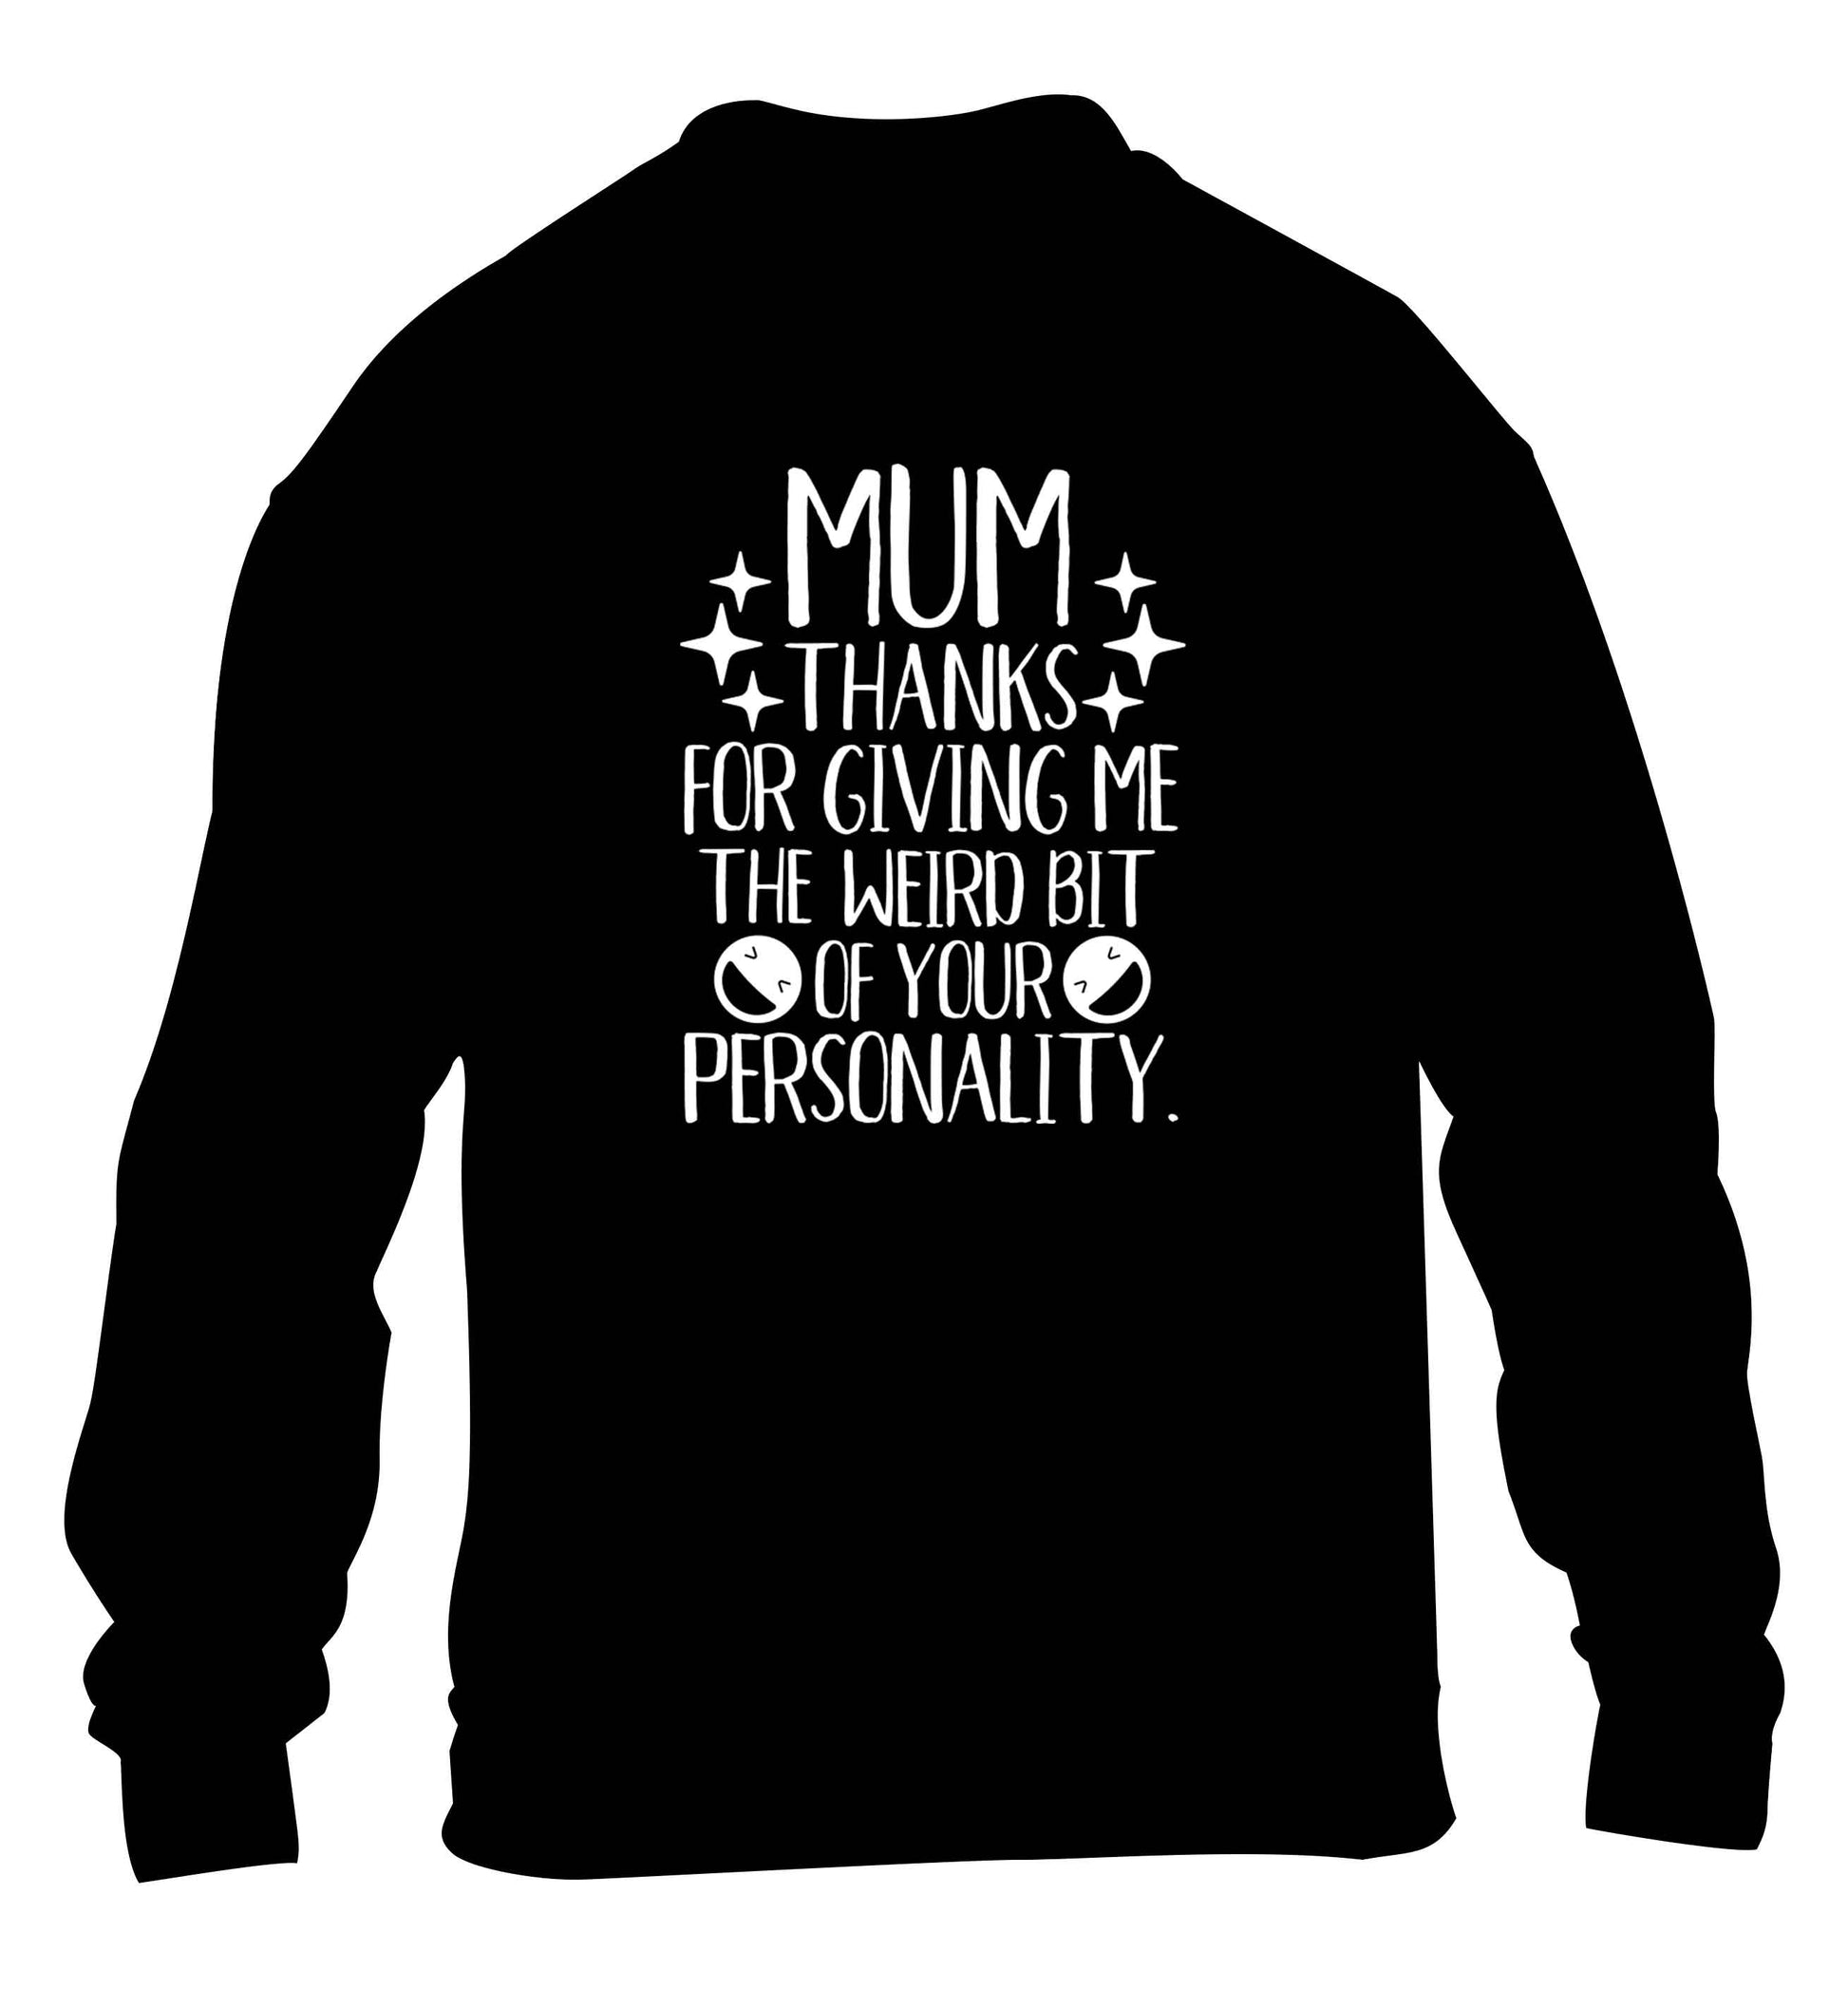 Mum thanks for giving me the weird bit of your personality children's black sweater 12-13 Years